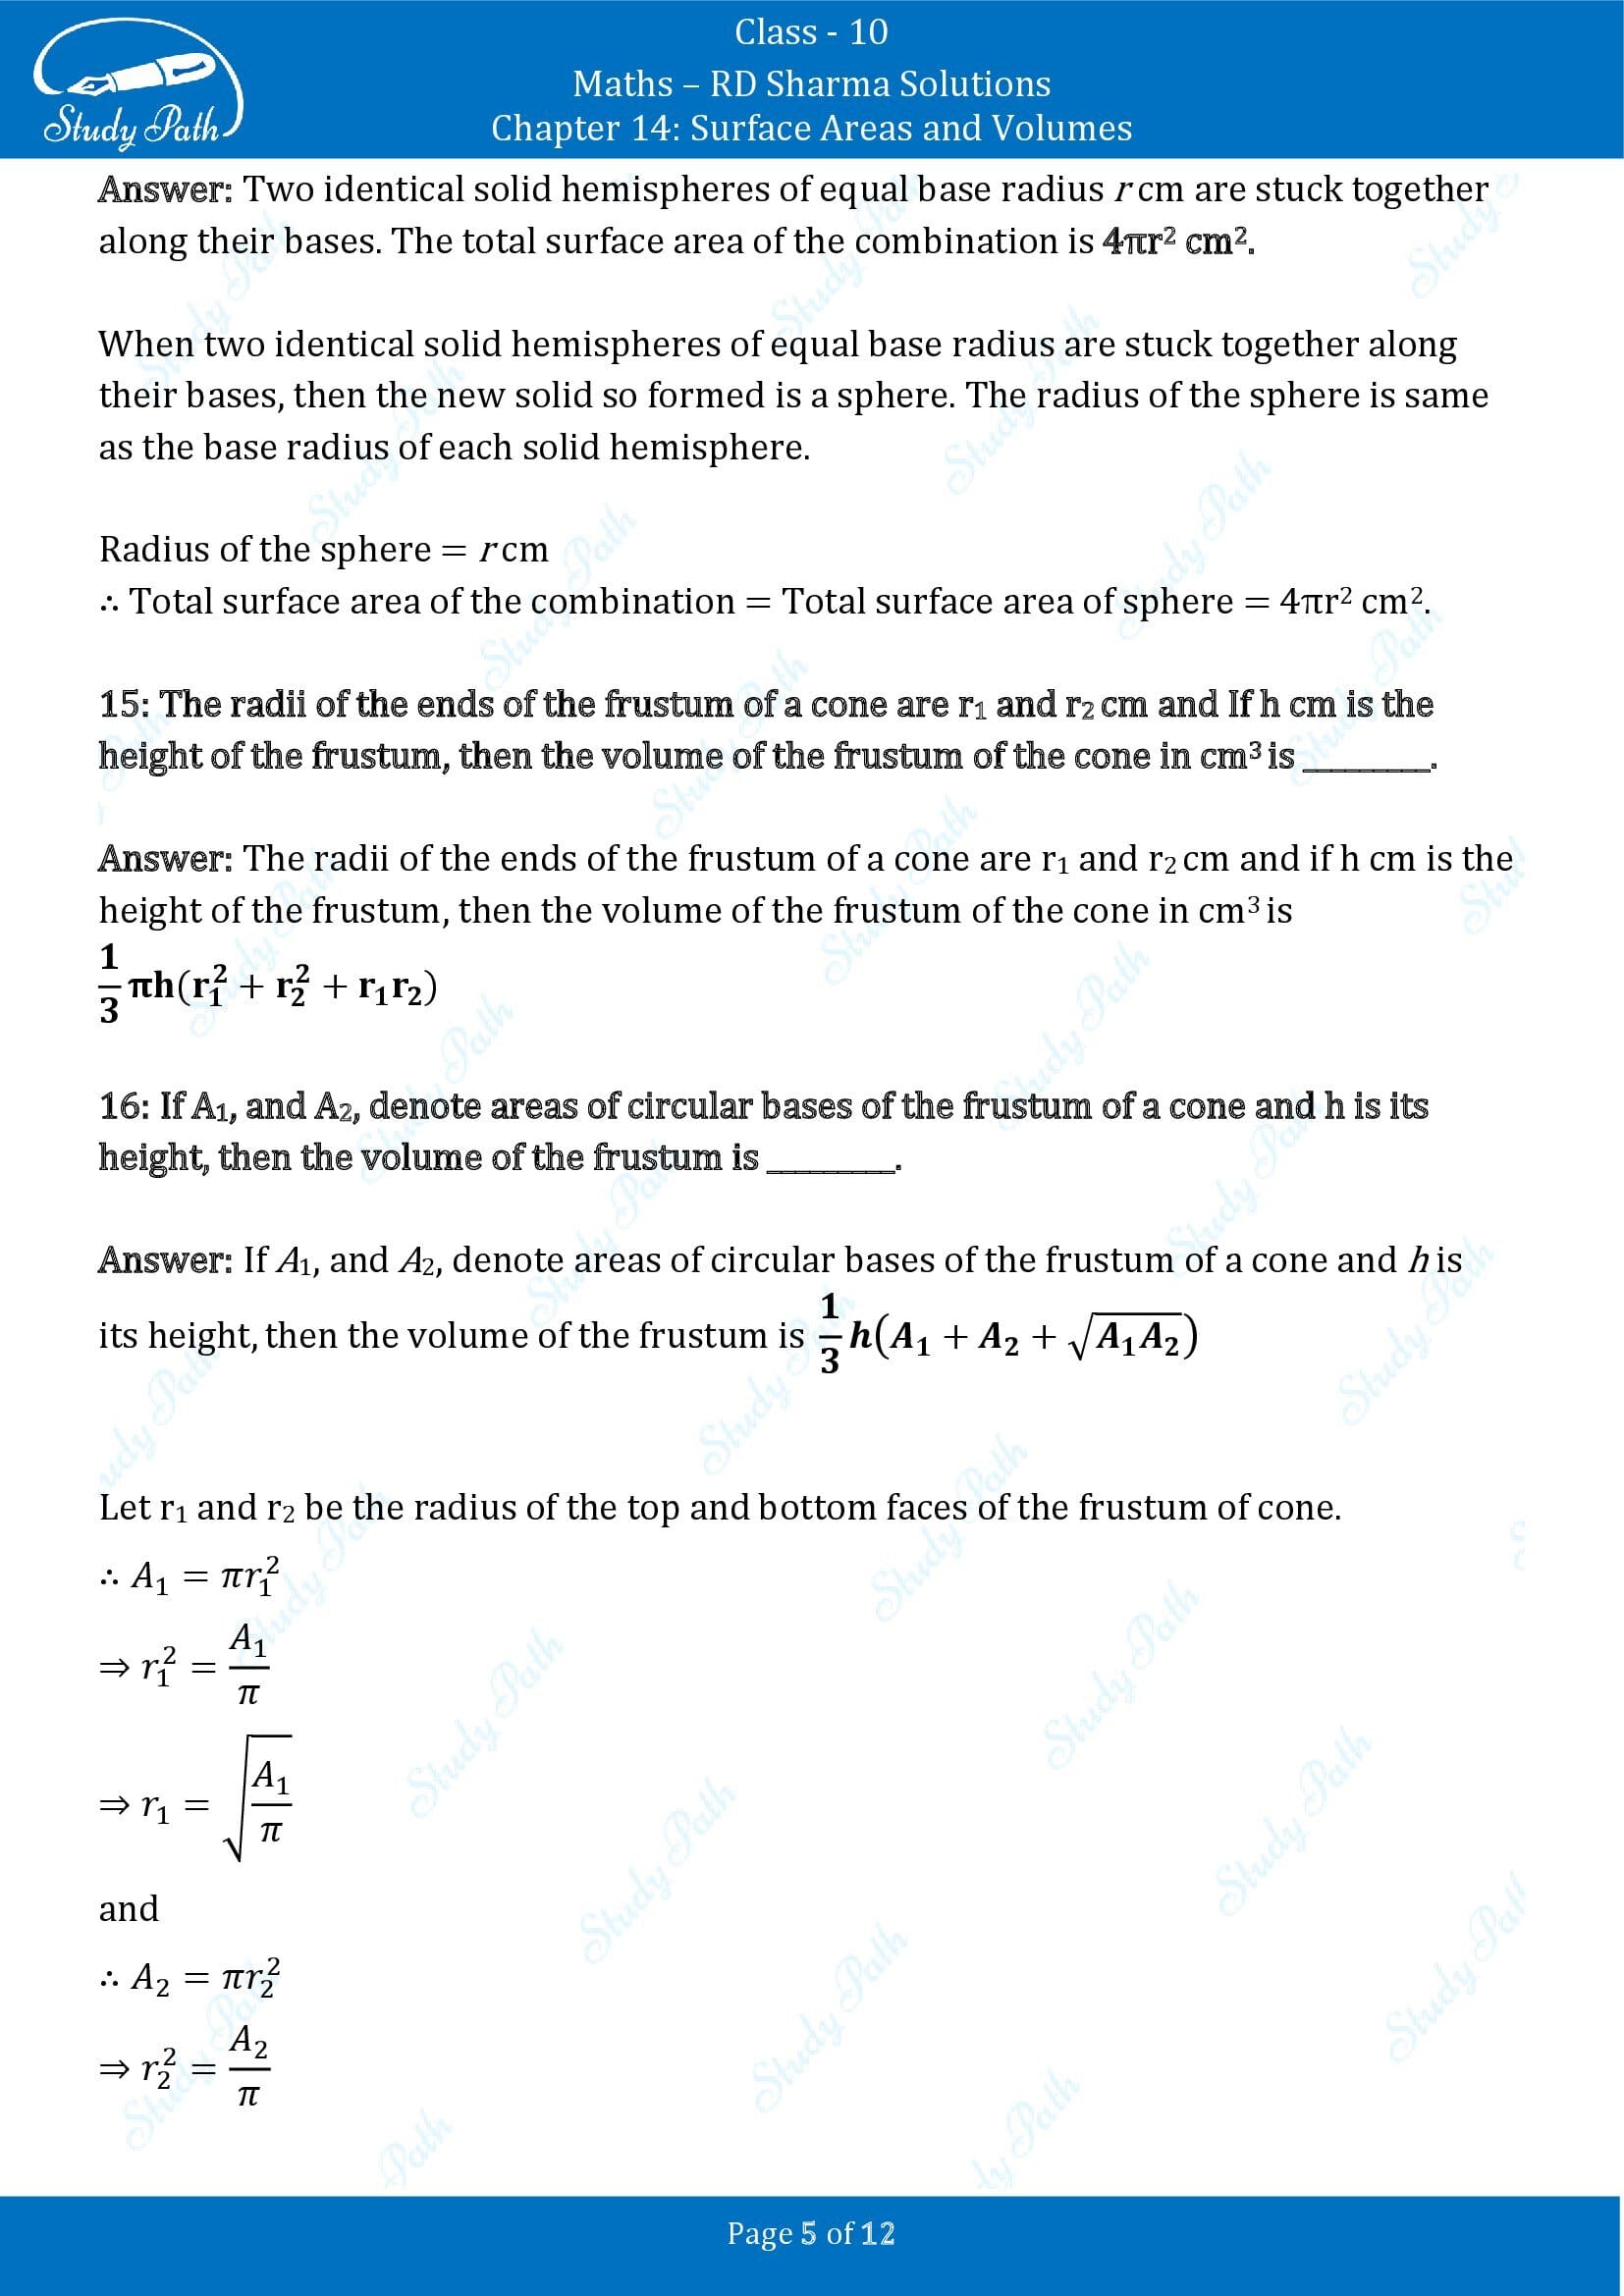 RD Sharma Solutions Class 10 Chapter 14 Surface Areas and Volumes Fill in the Blank Type Questions FBQs 00005